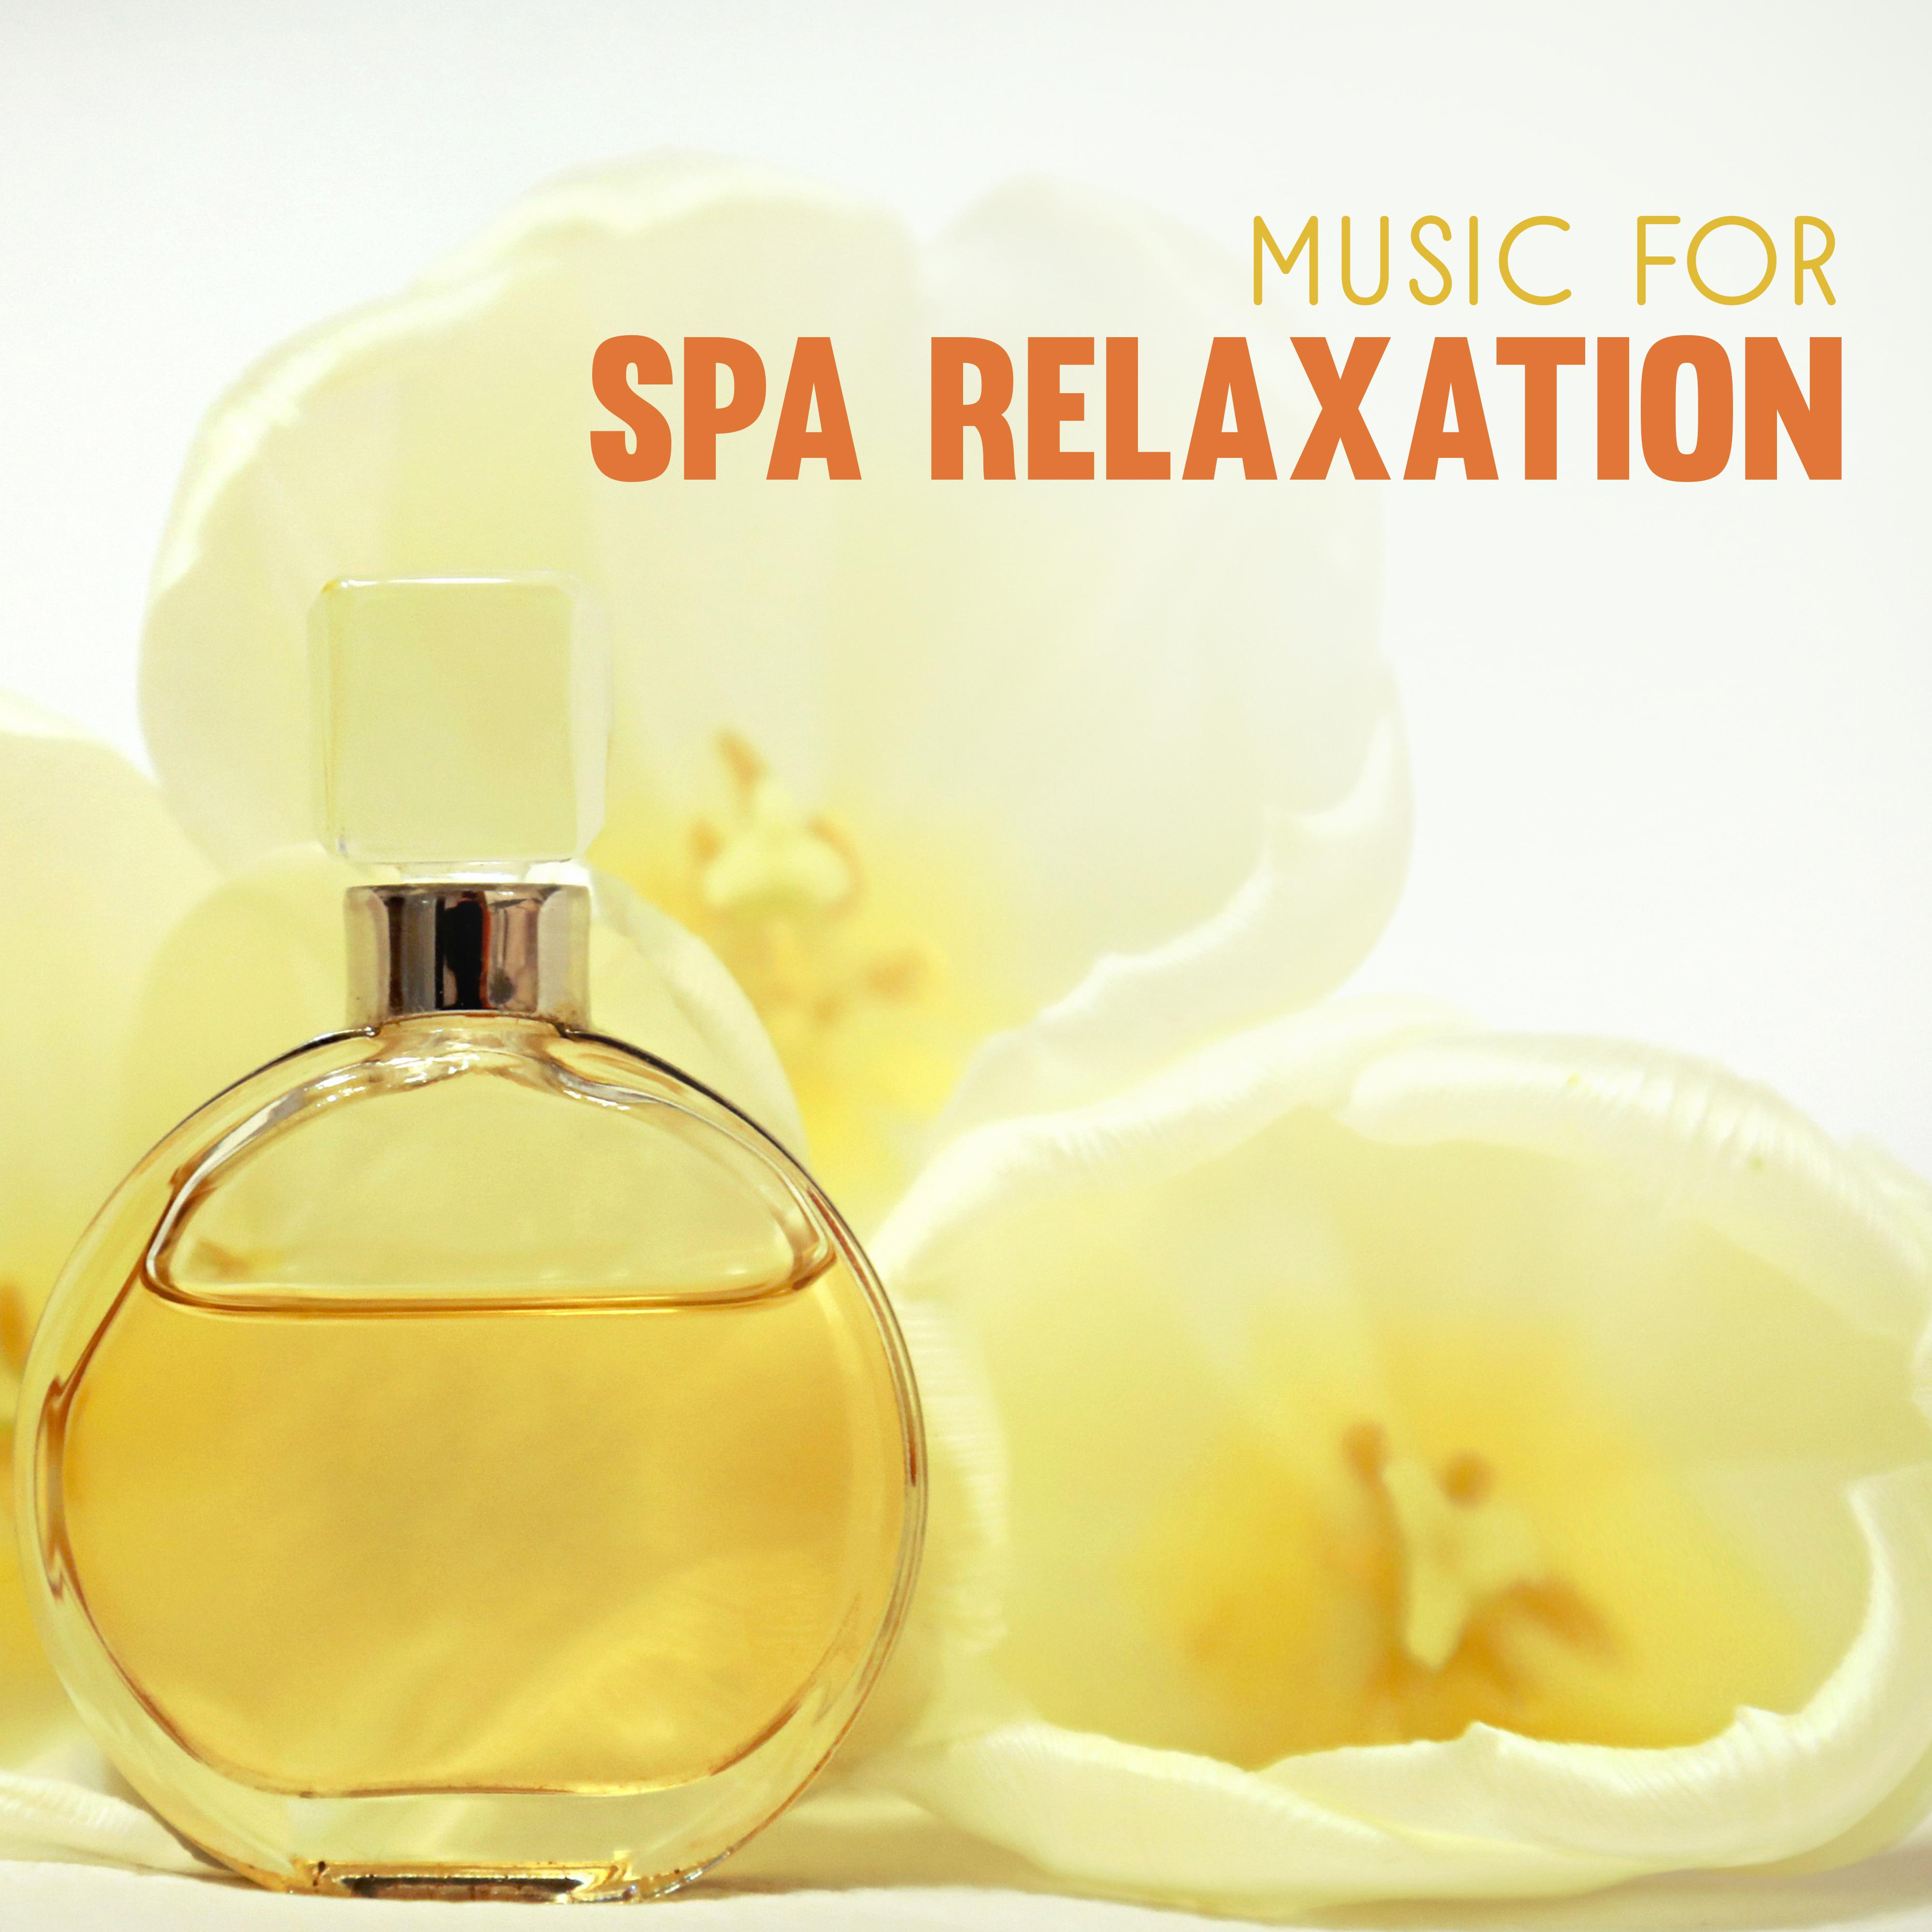 Music for Spa Relaxation – New Age Spa Music, Rest & Rleax, Easy Listening, Stress Relief, Hot Stone Massage